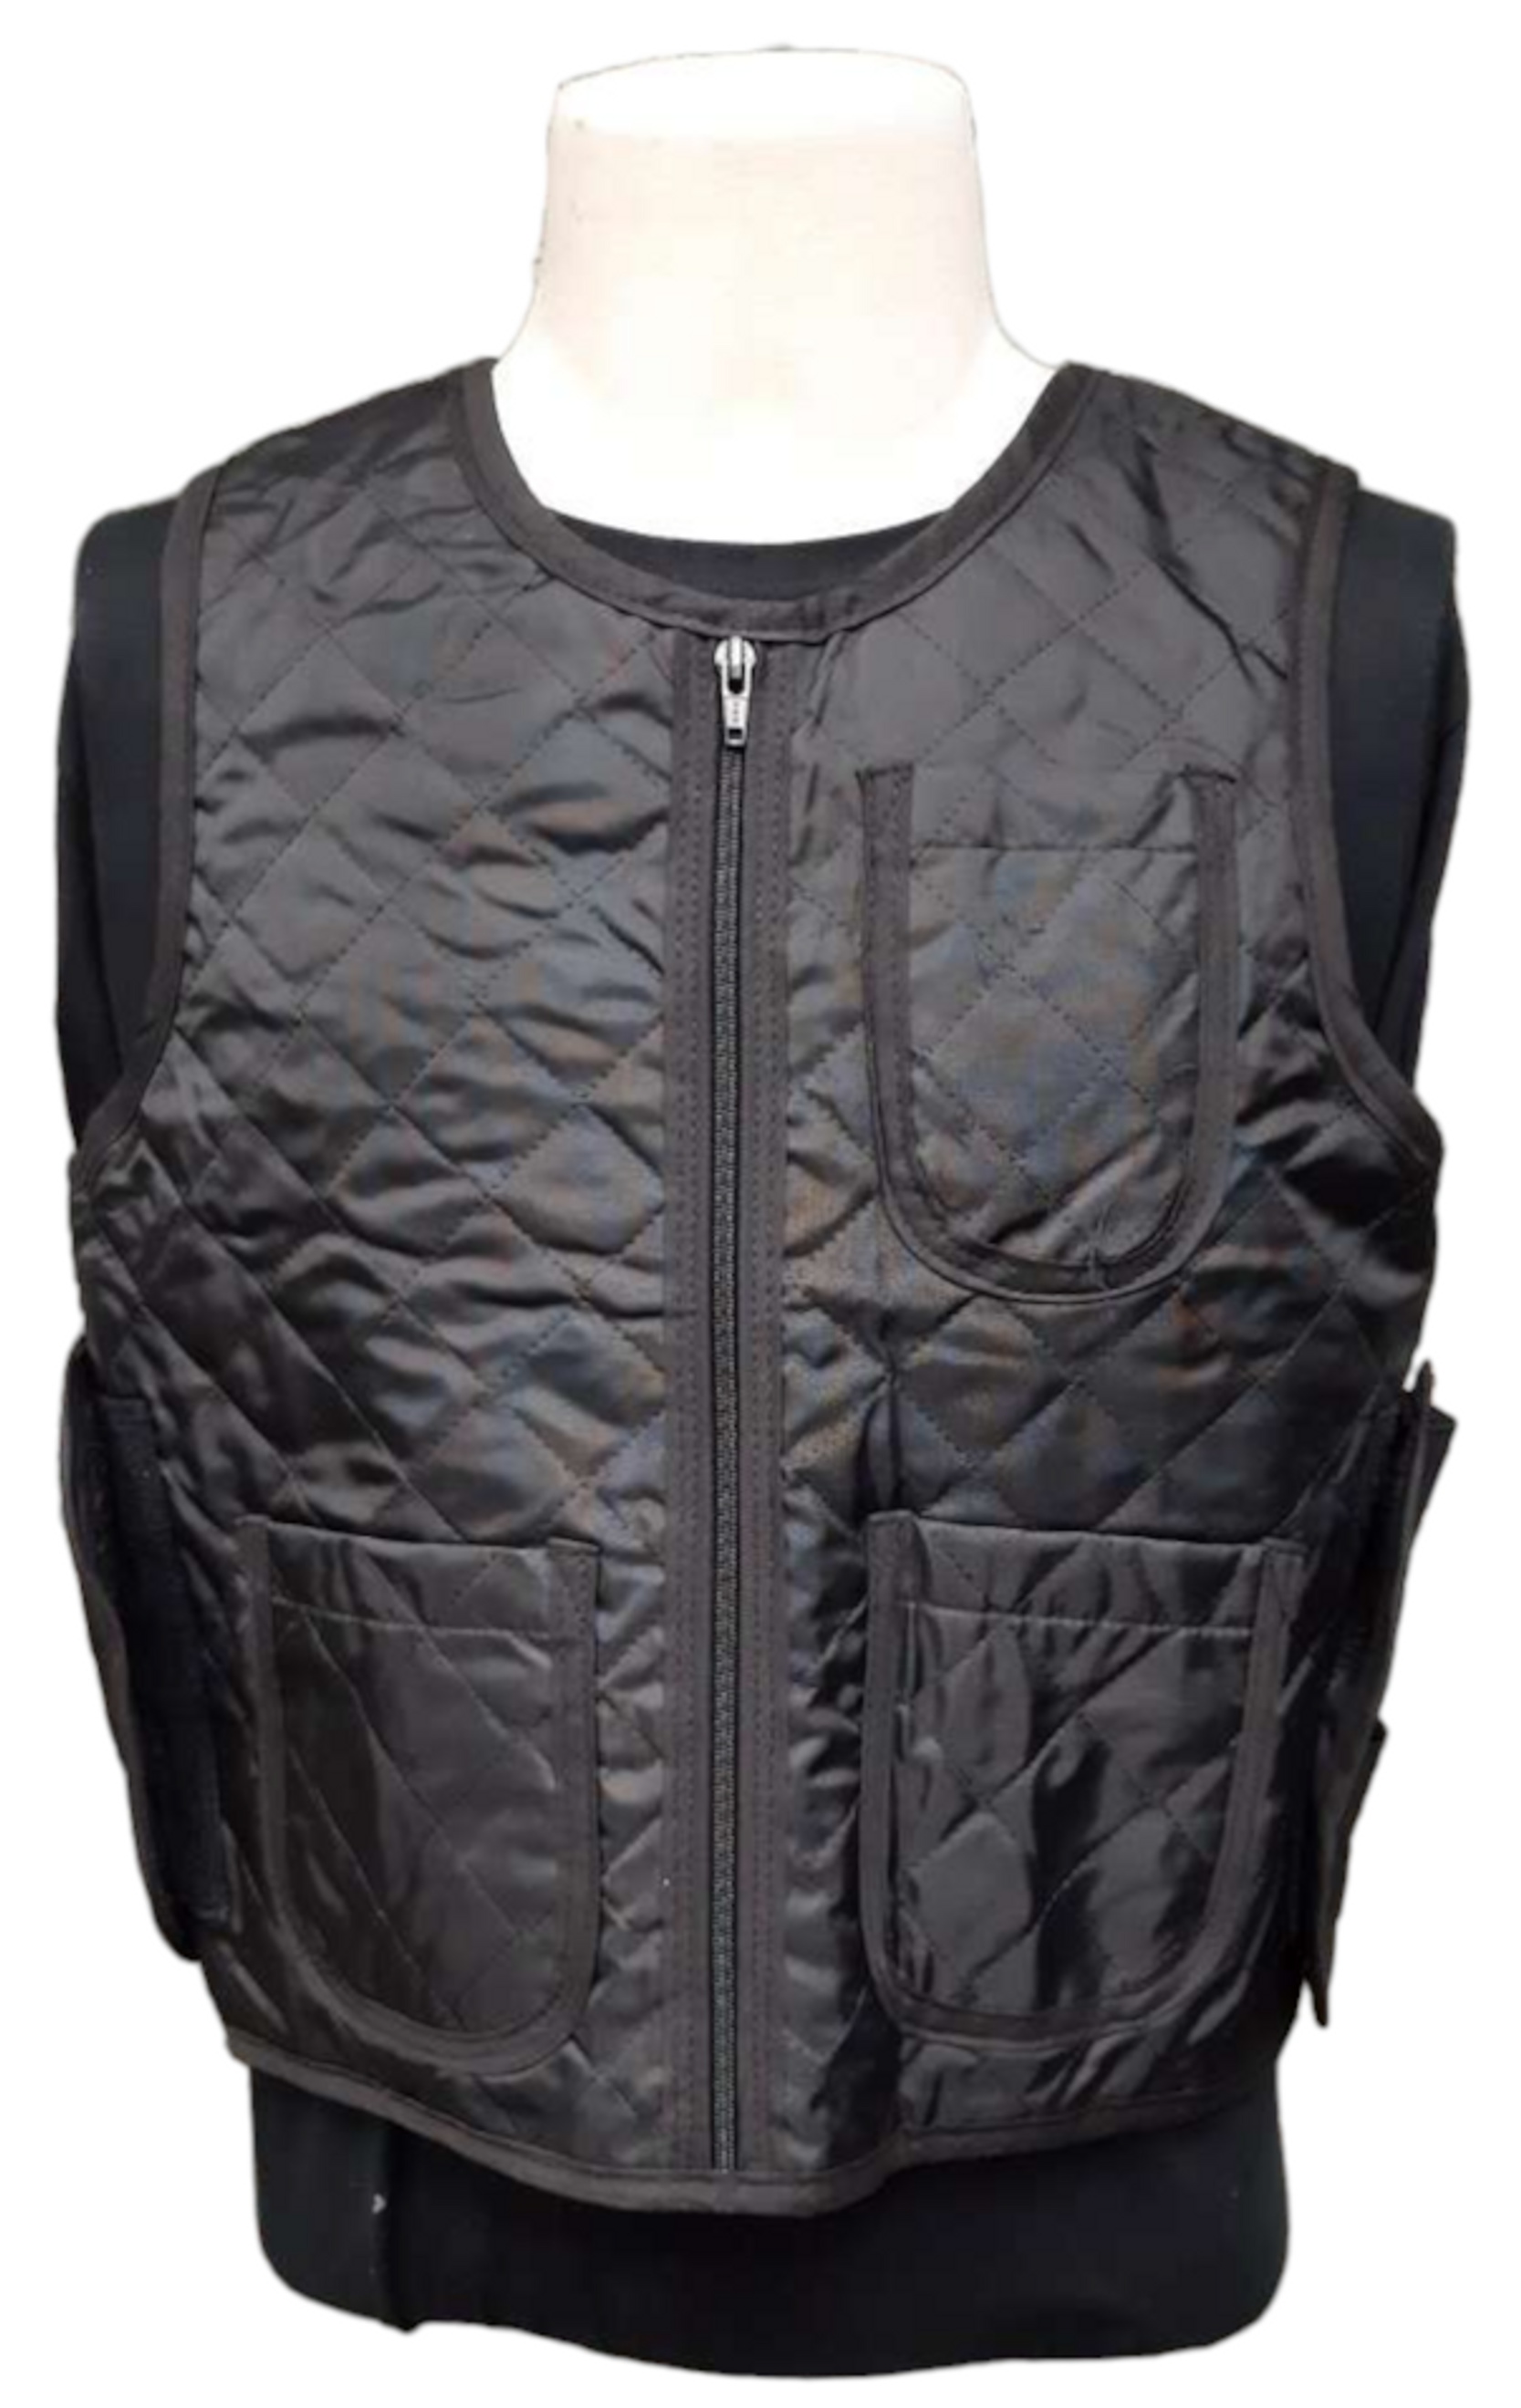 PACA / ABA Quilted Soft Armor Carrier - TYPE 2